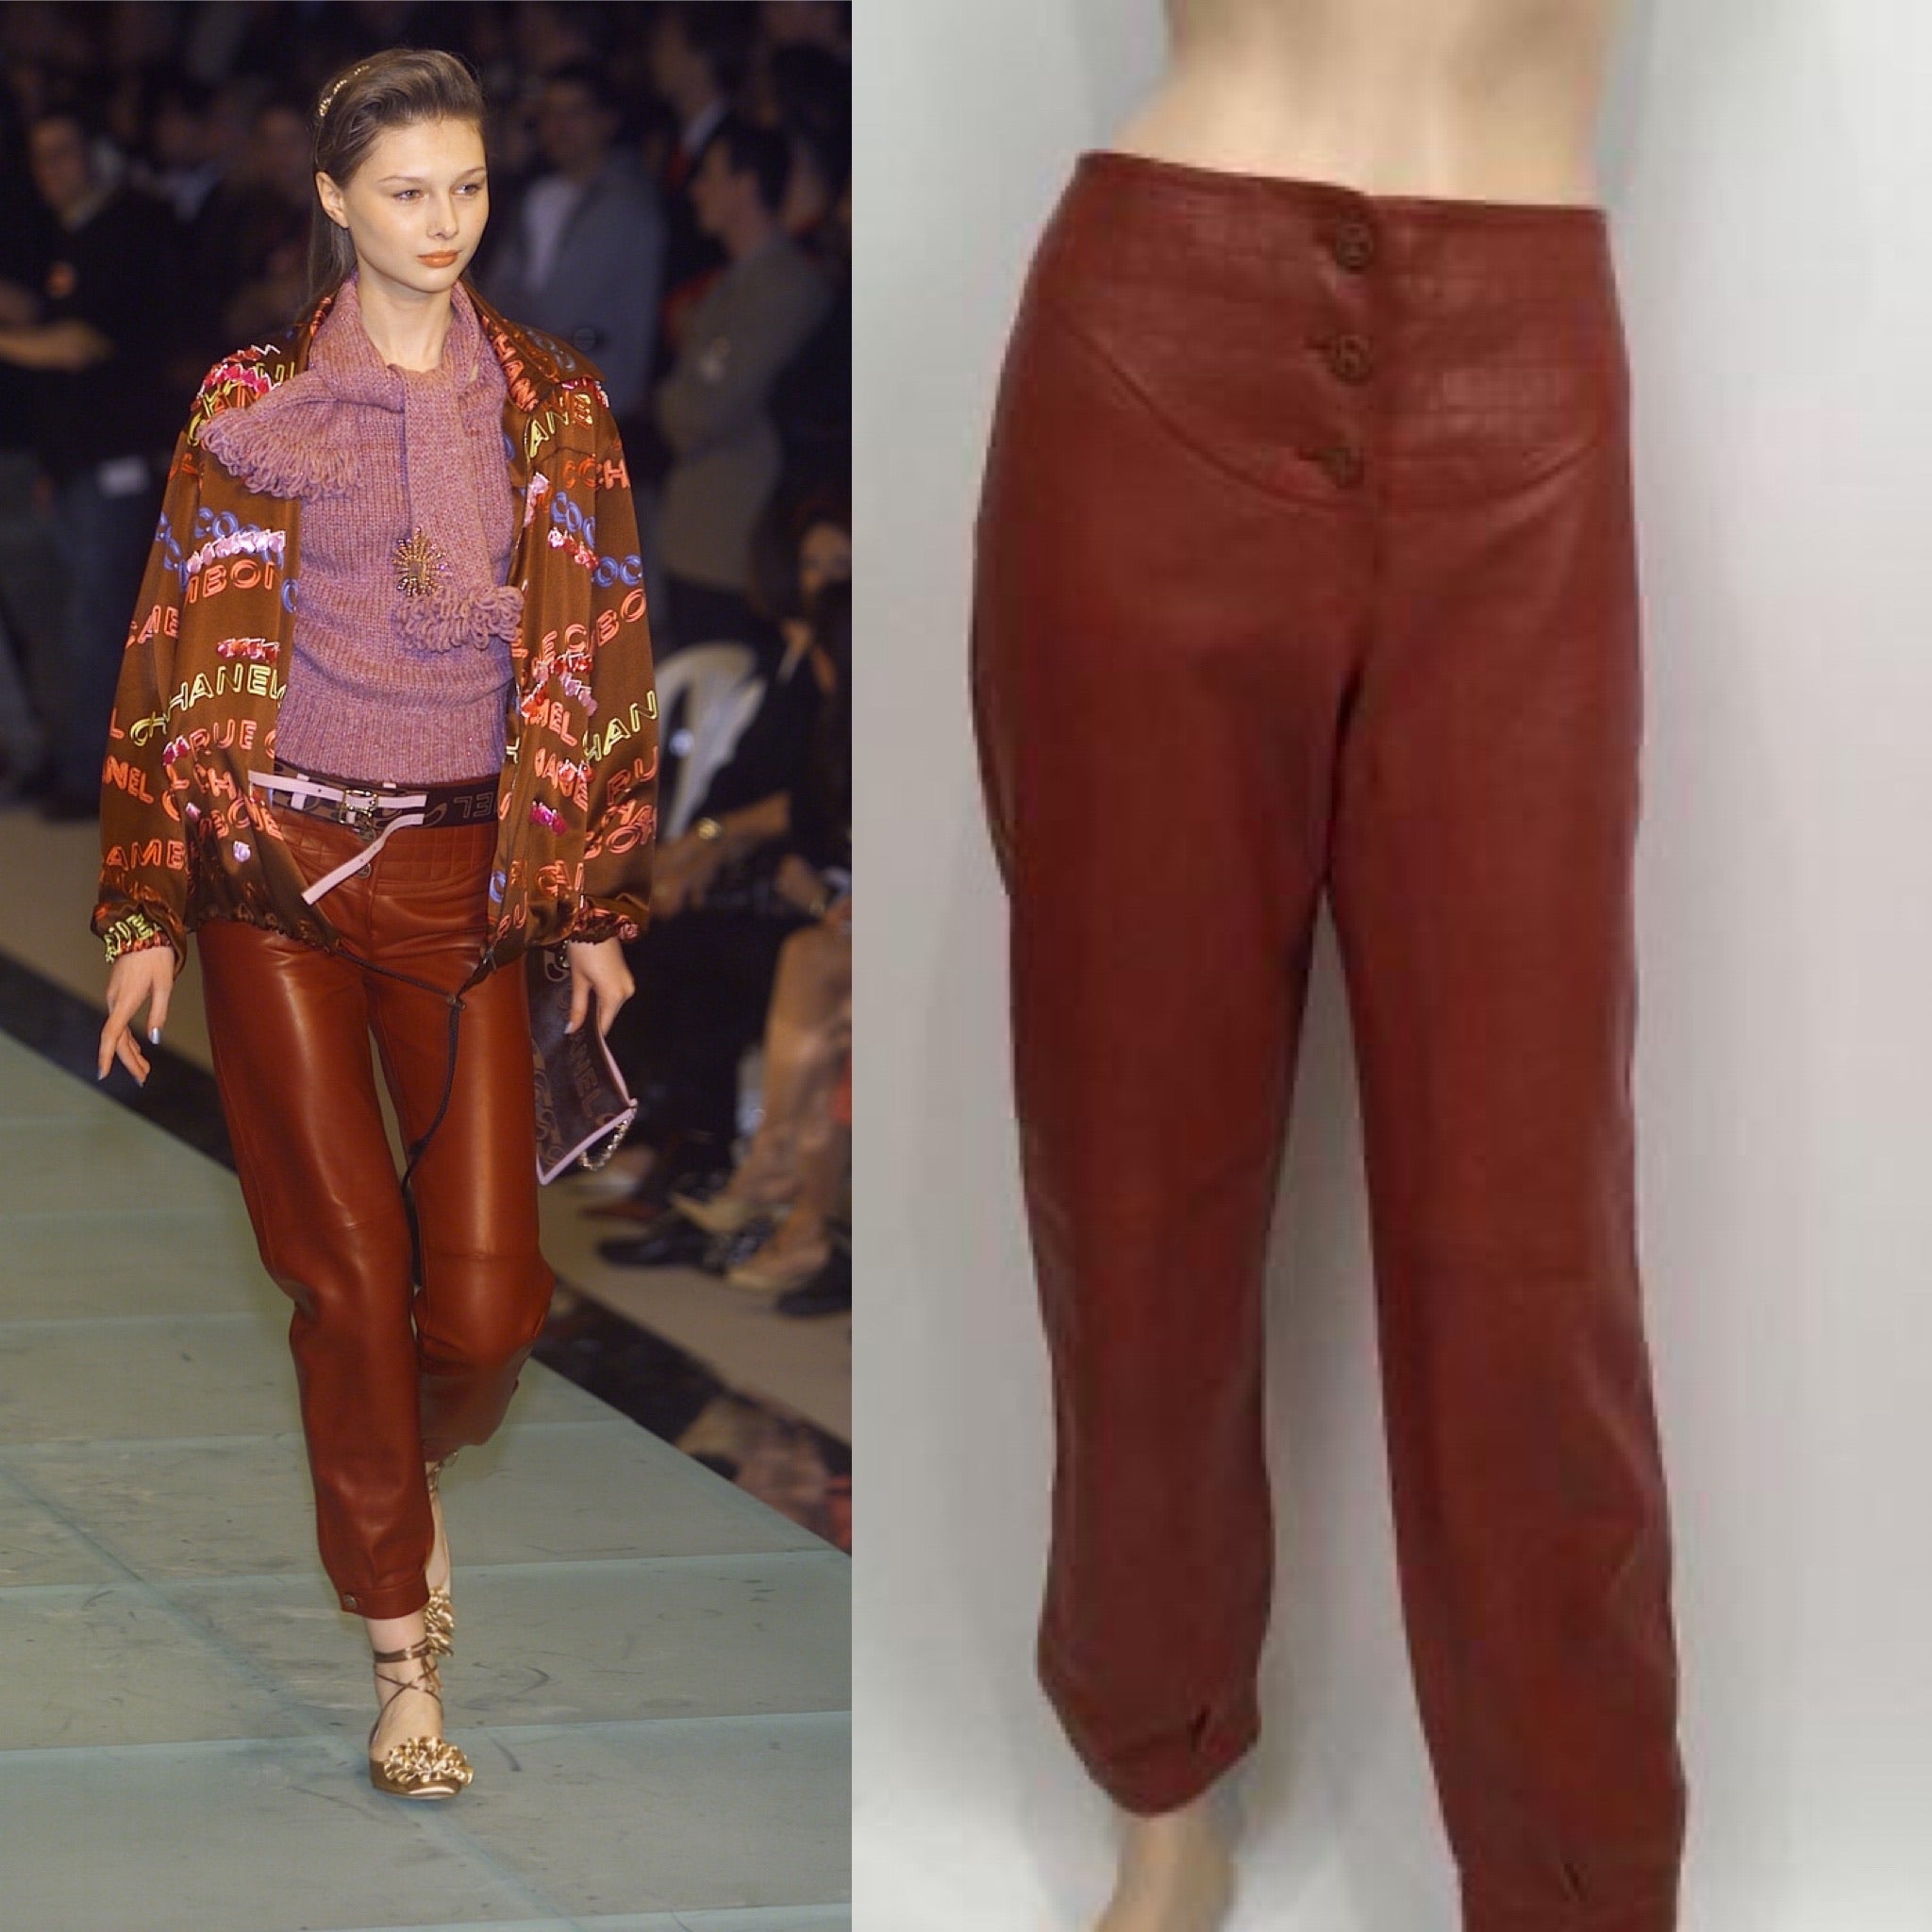 HelensChanel Nwt New with Tags Chanel 01A, 2001 Fall Autumn Vintage Leather Pants Leggings Rust Color FR 40 US 2/4/6